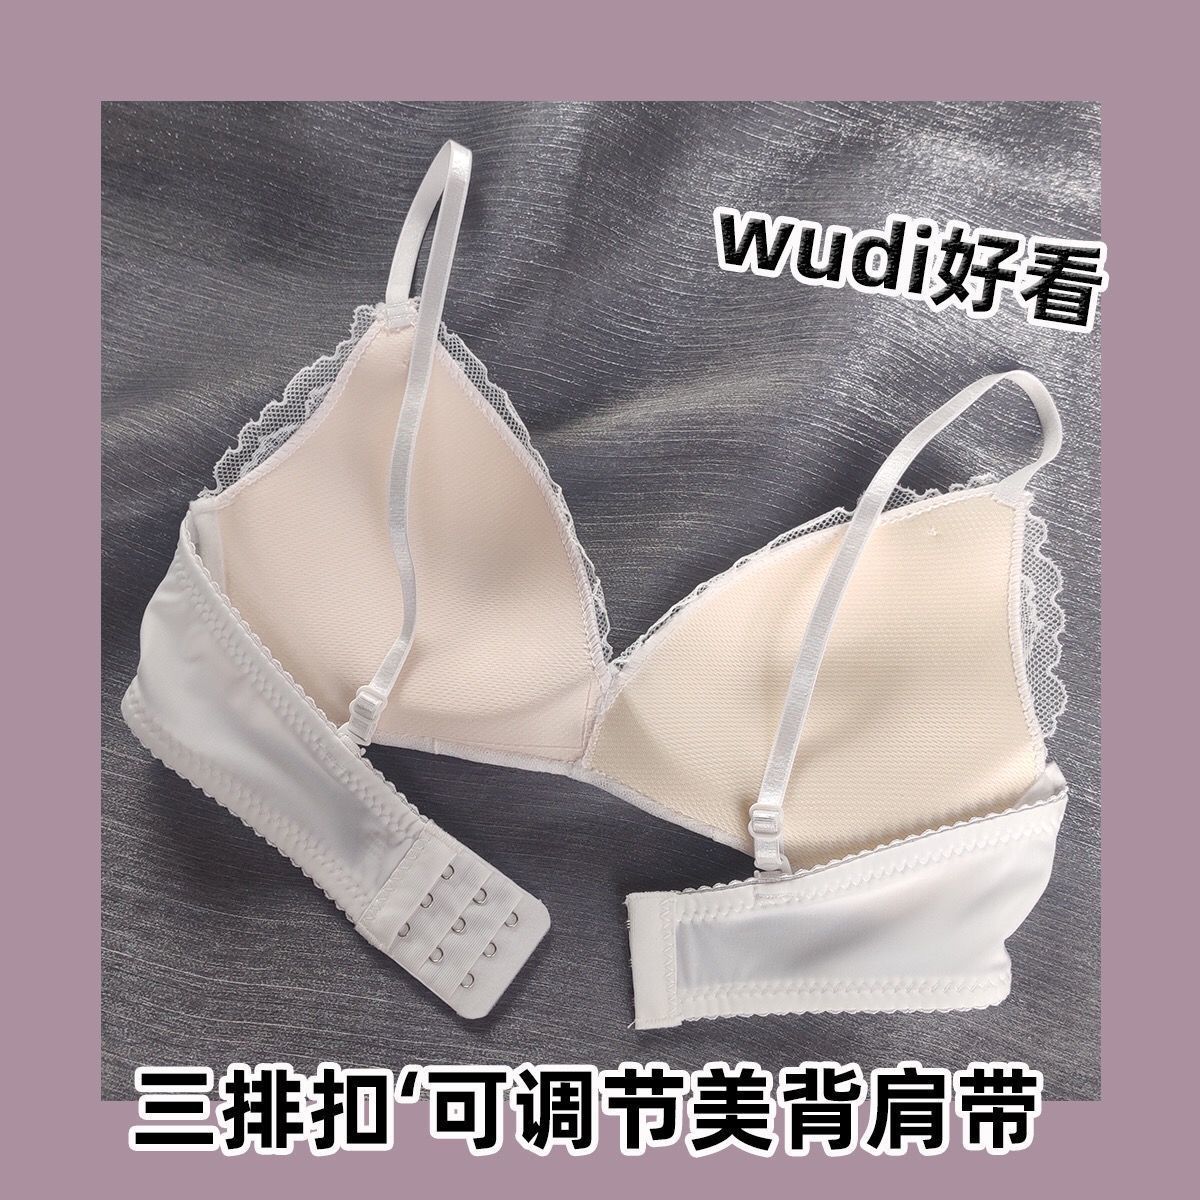 Thin underwear women's triangle cup without steel ring Korean version of sweet small chest gather anti-sagging close breast bra set